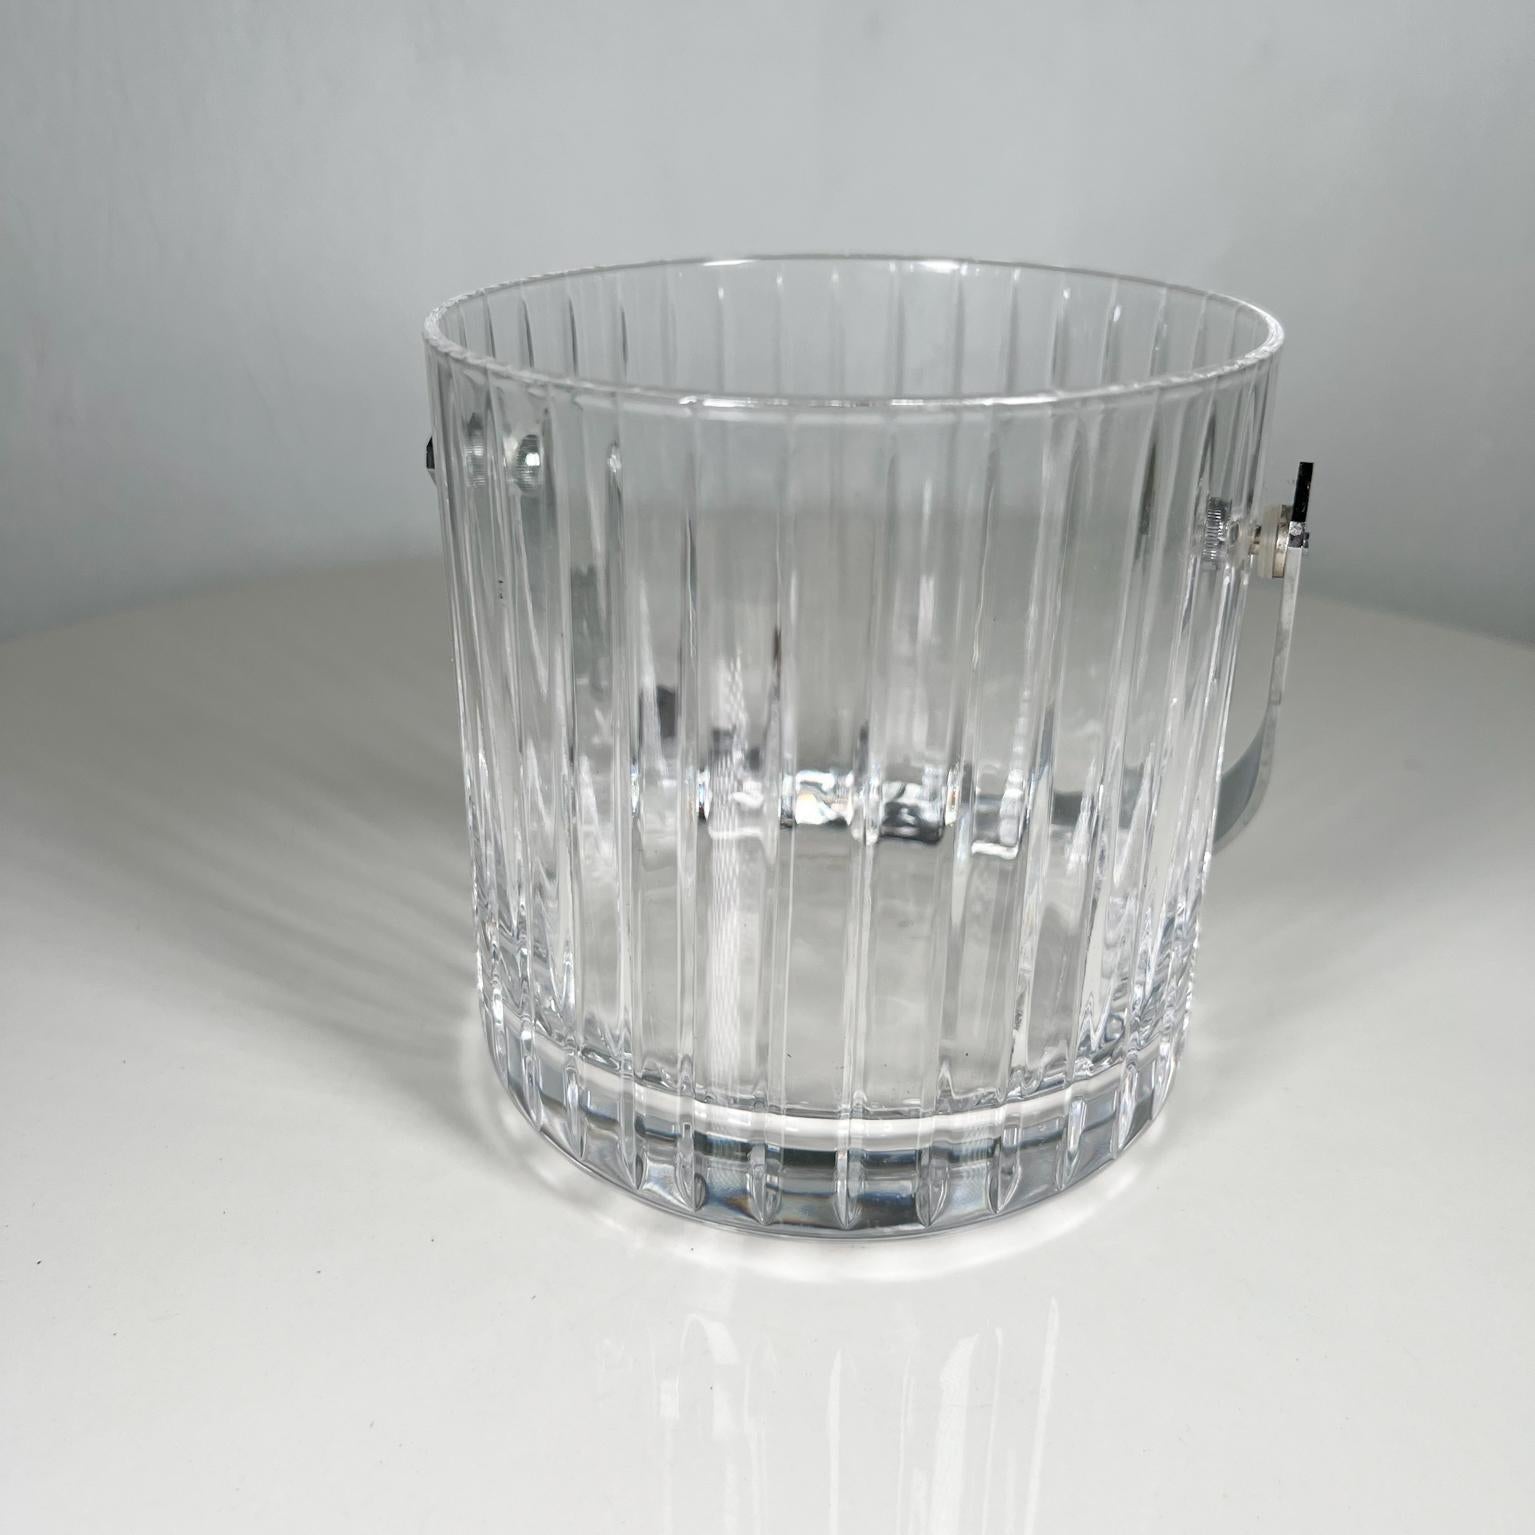 1960s Modernist Ribbed Crystal Glass Ice Bucket from Italy In Good Condition For Sale In Chula Vista, CA